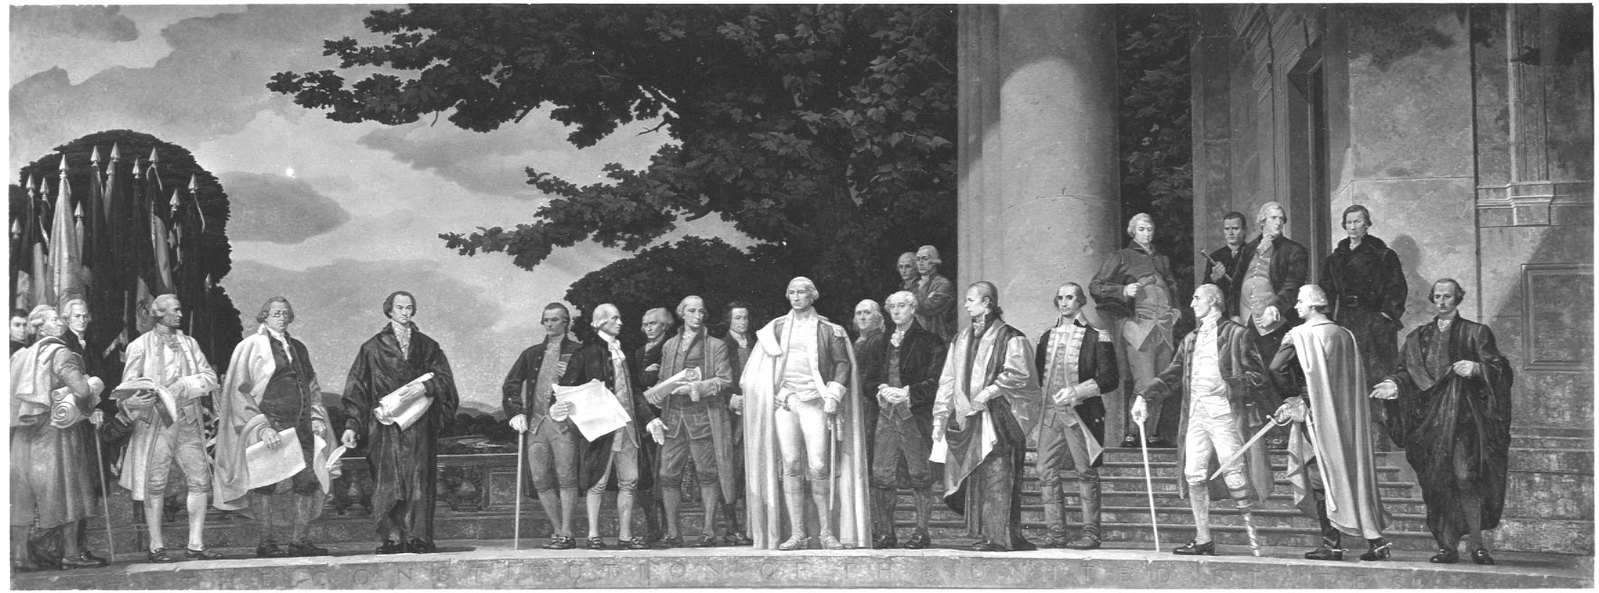 Photograph of the Mural, The Constitution, by Barry Faulkner, 10/27/1936, National Archives and Records Administration 